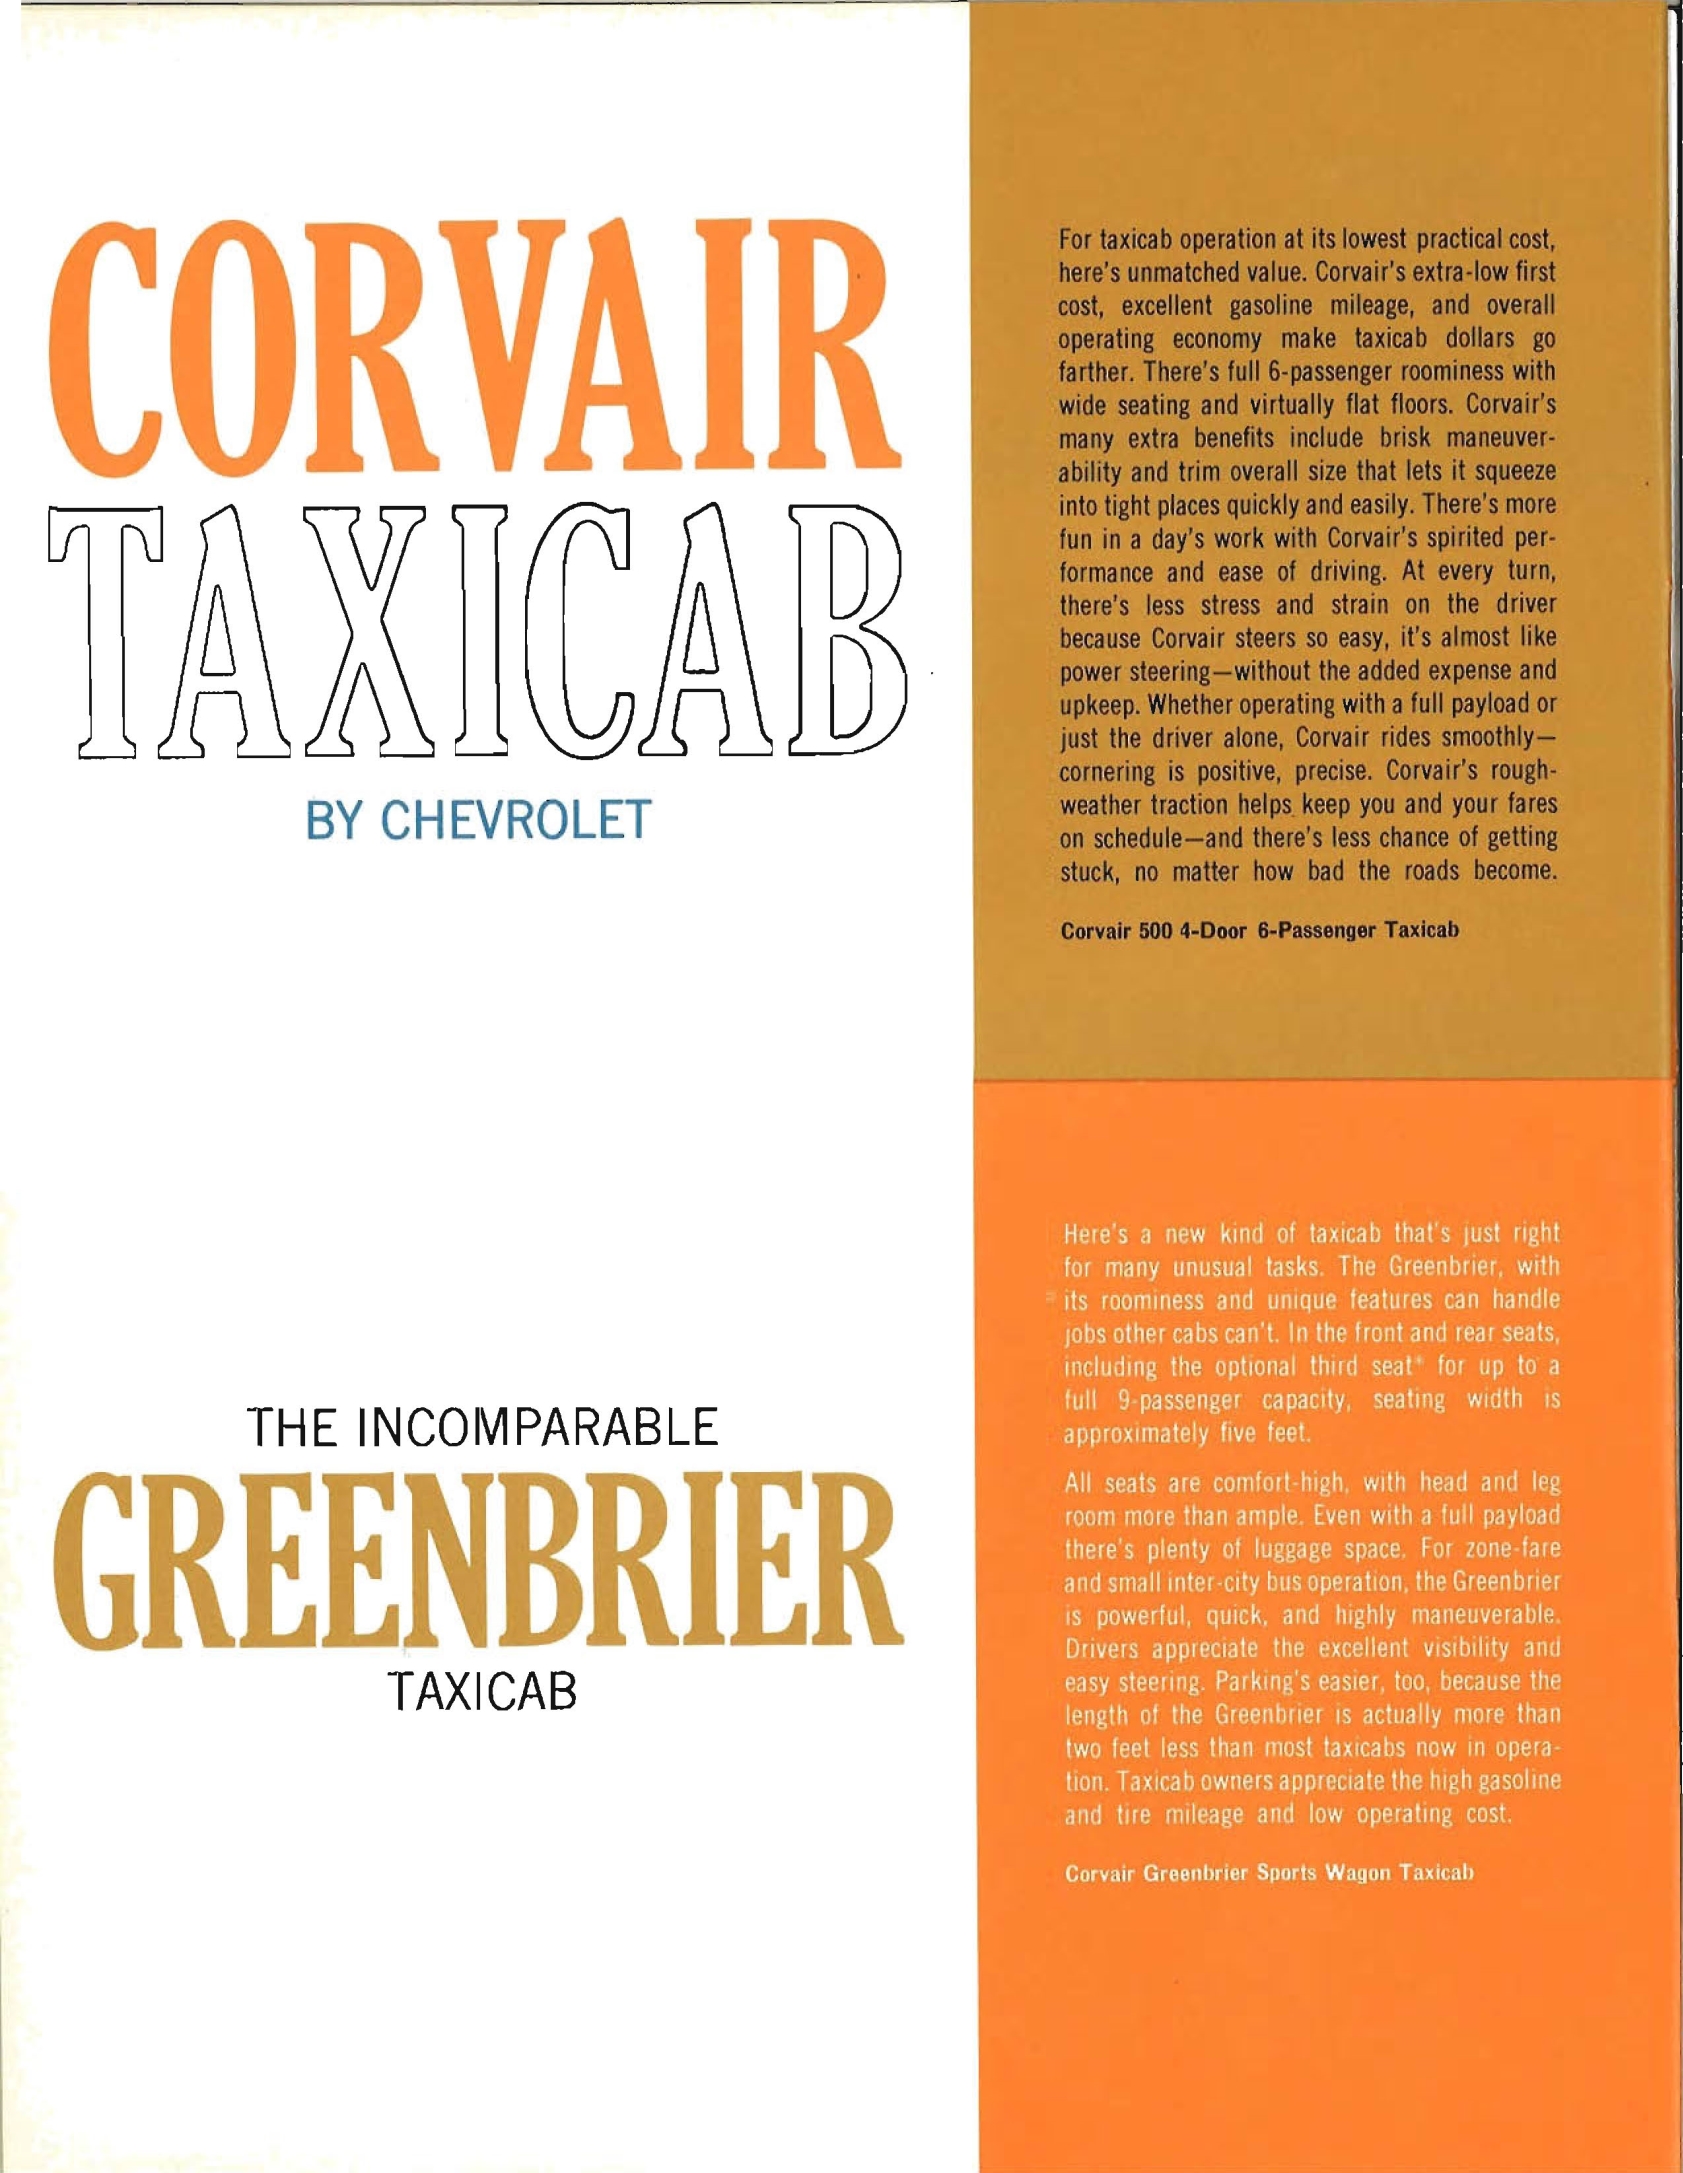 1961_Chevrolet_Taxi_Cabs-12